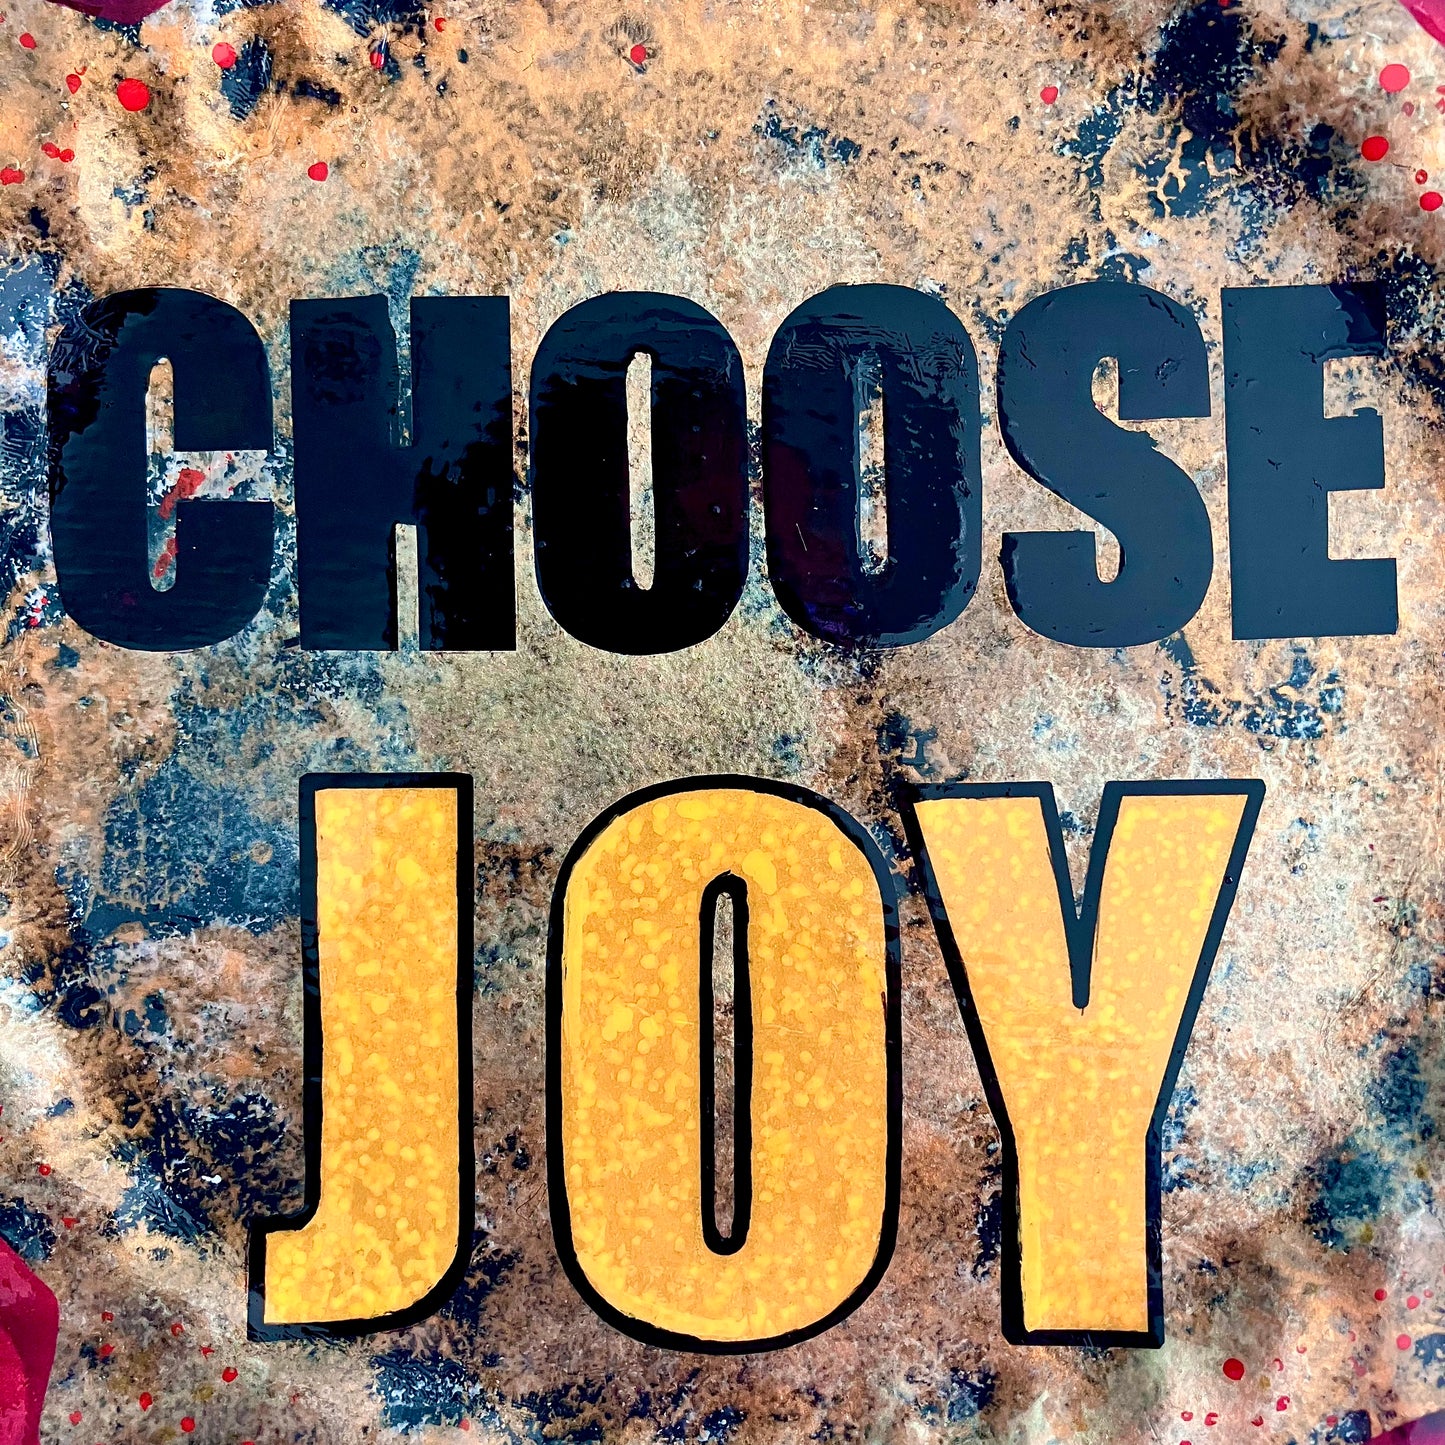 Gold Upcycled Wall Plate - “Choose Joy” - by House of Frisson